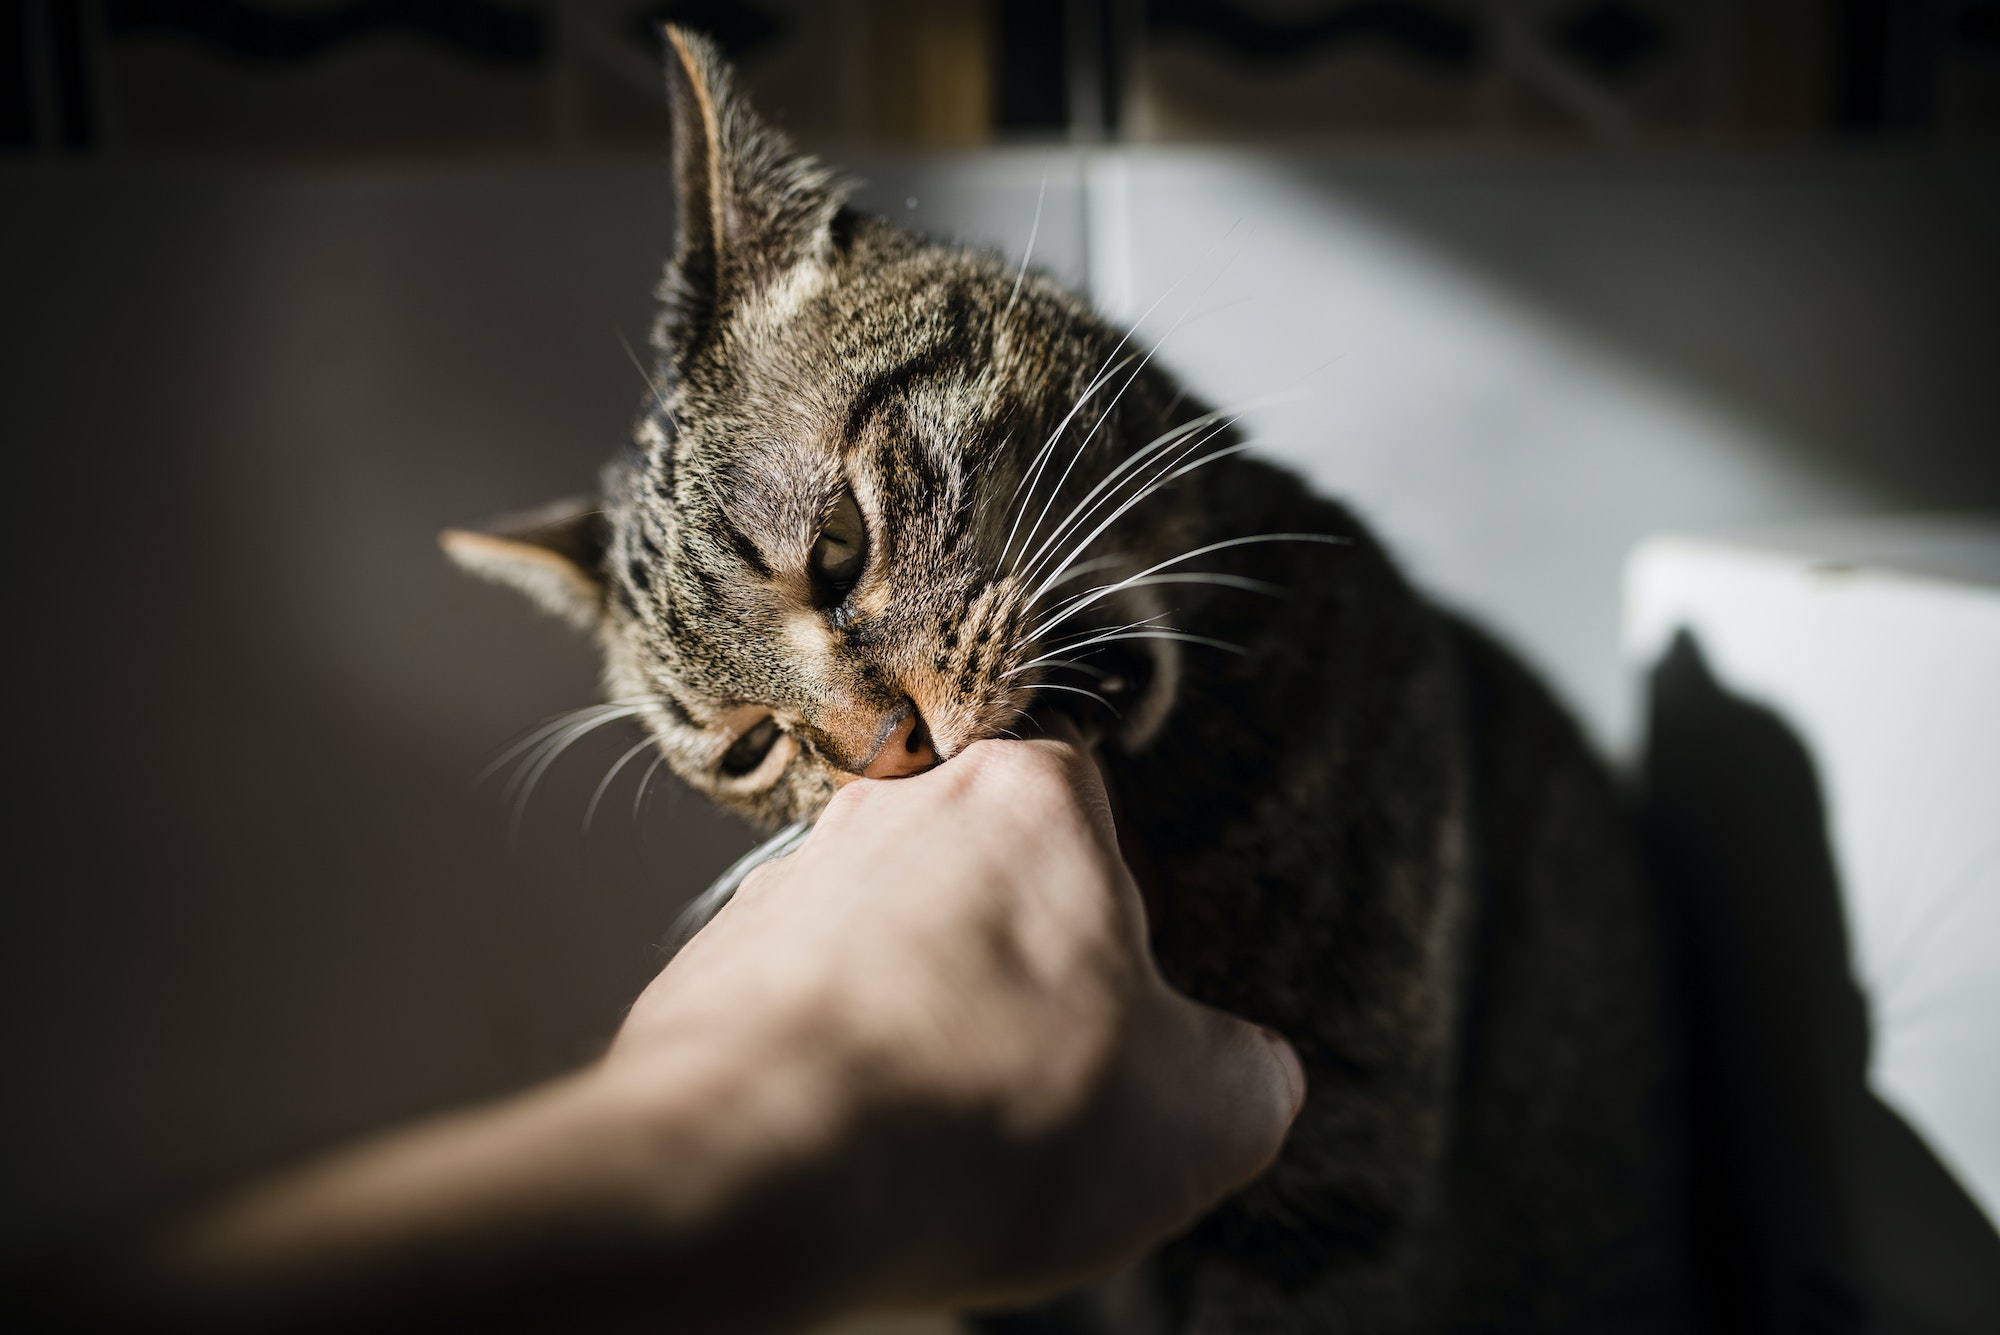 Tabby cat biting hand of owner